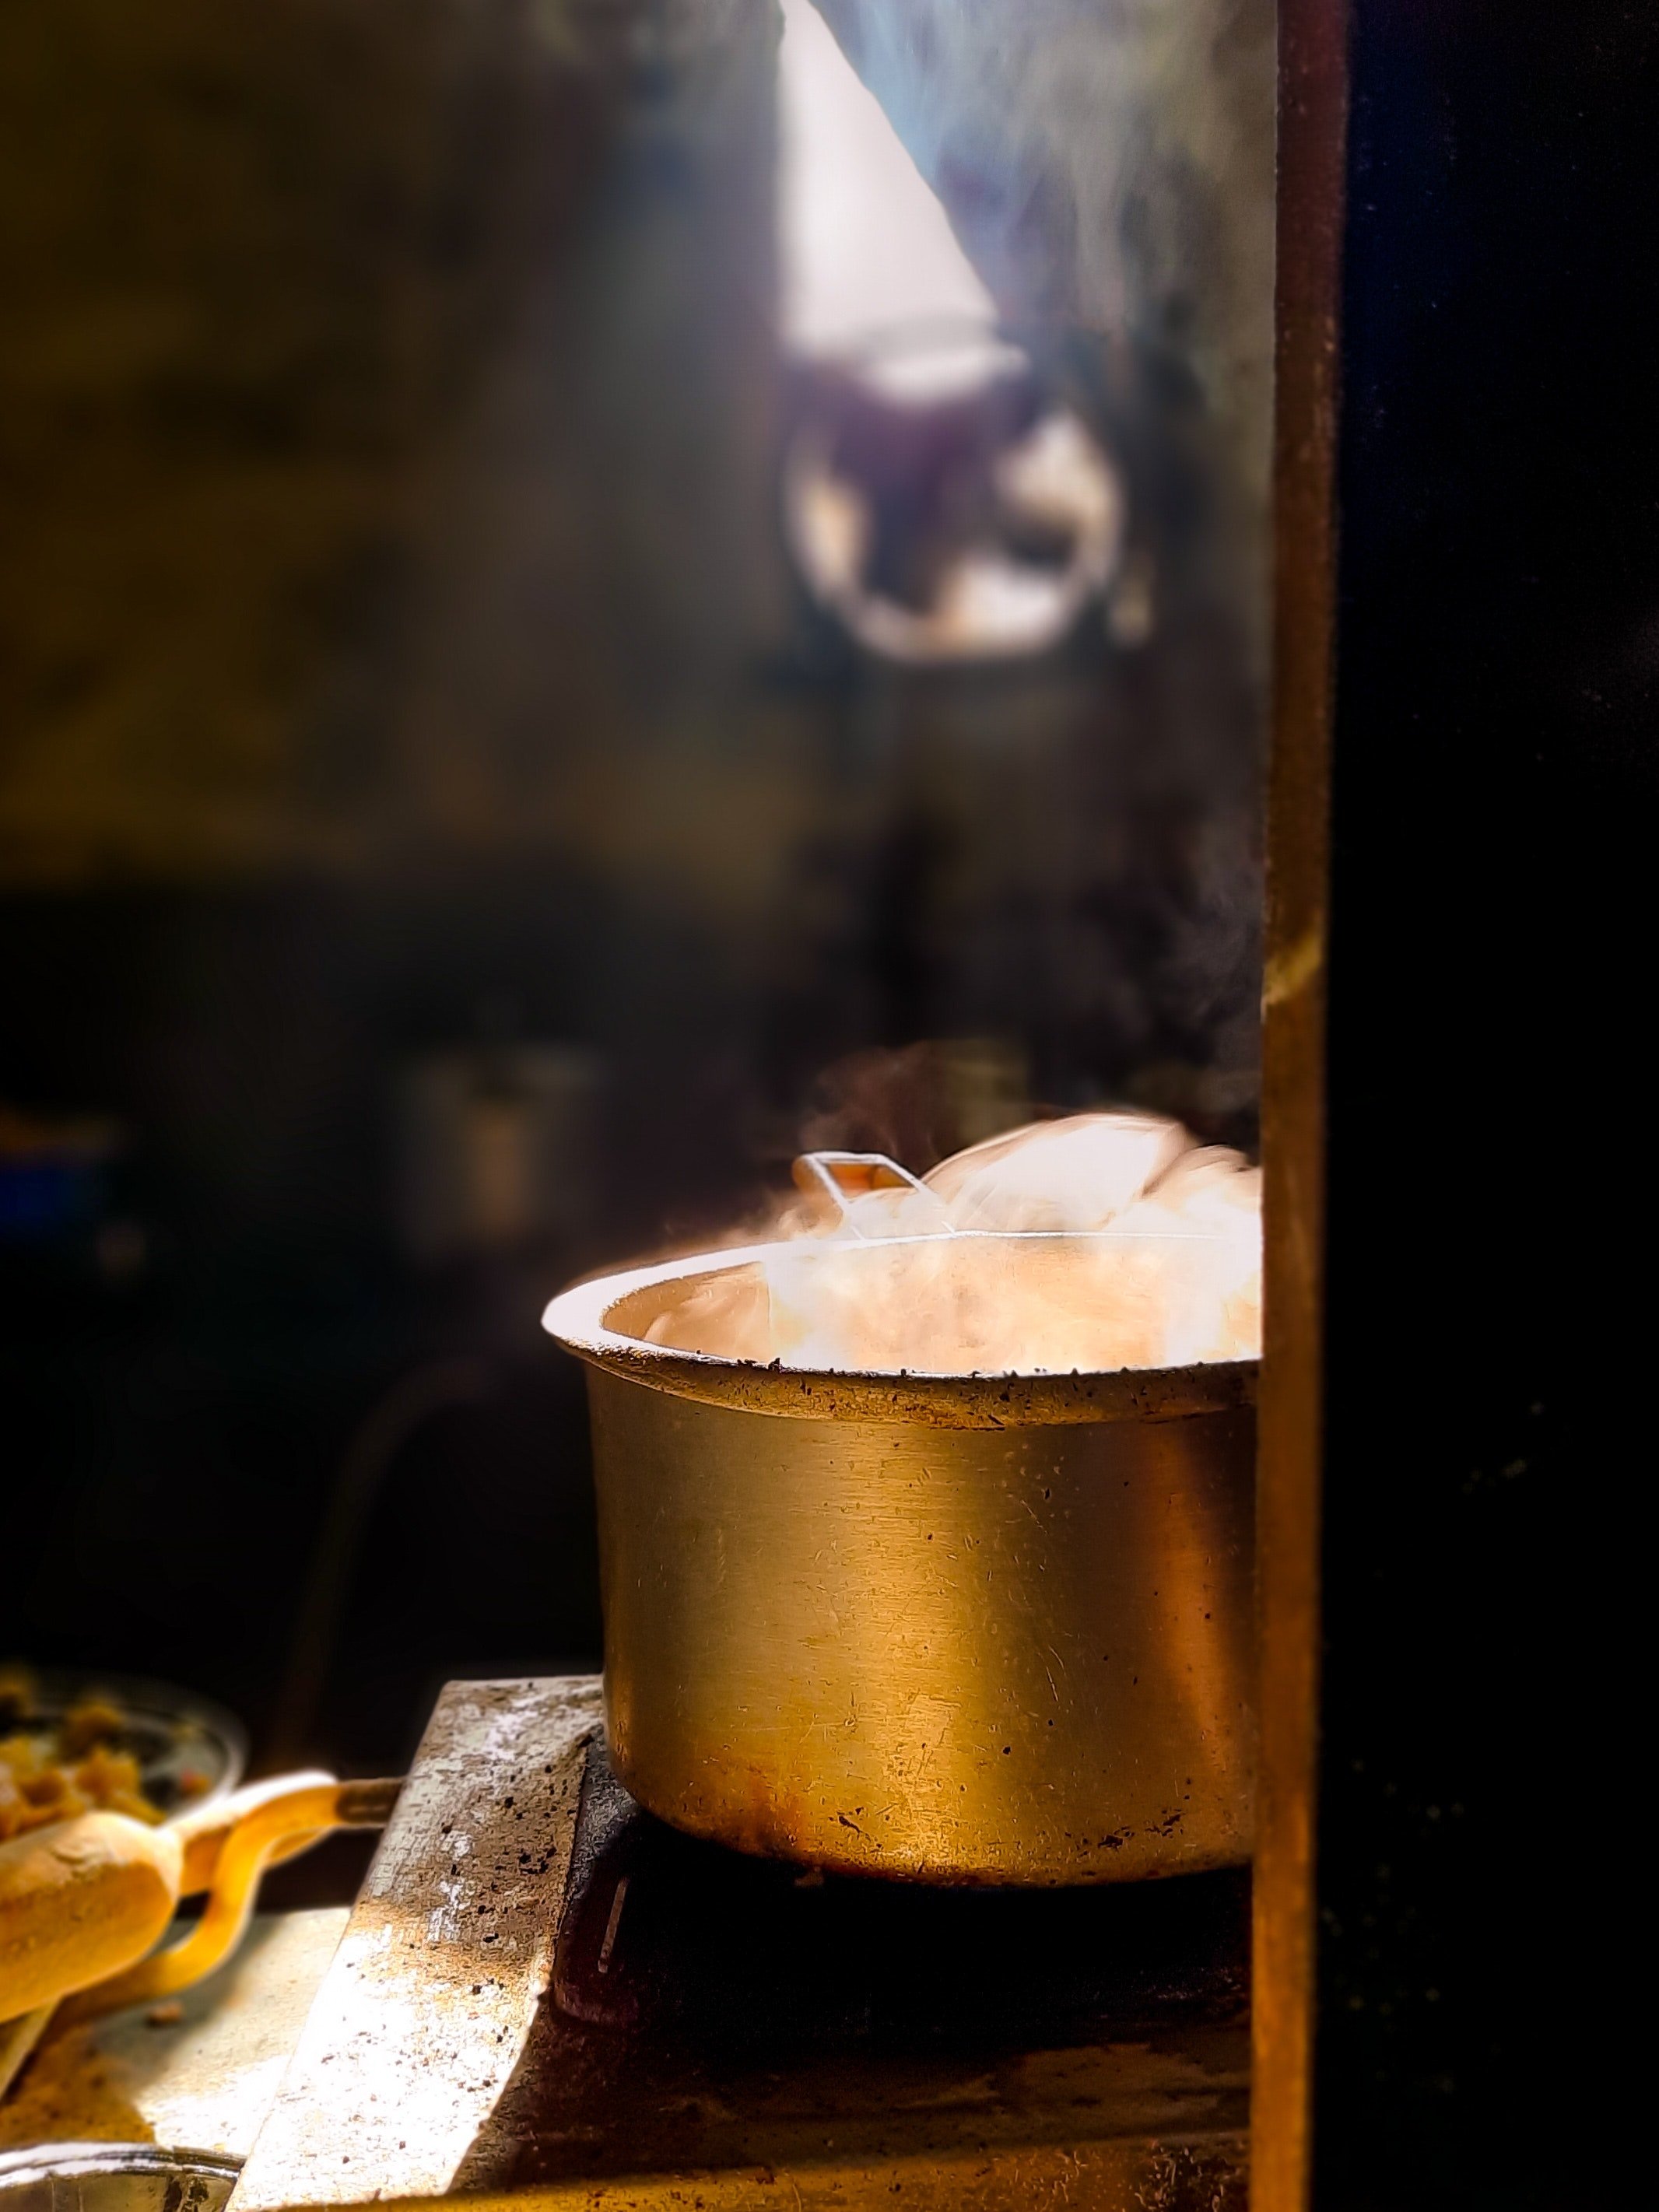 Pictured - A copper pot placed on an old fashioned cooker | Source: Pexels 